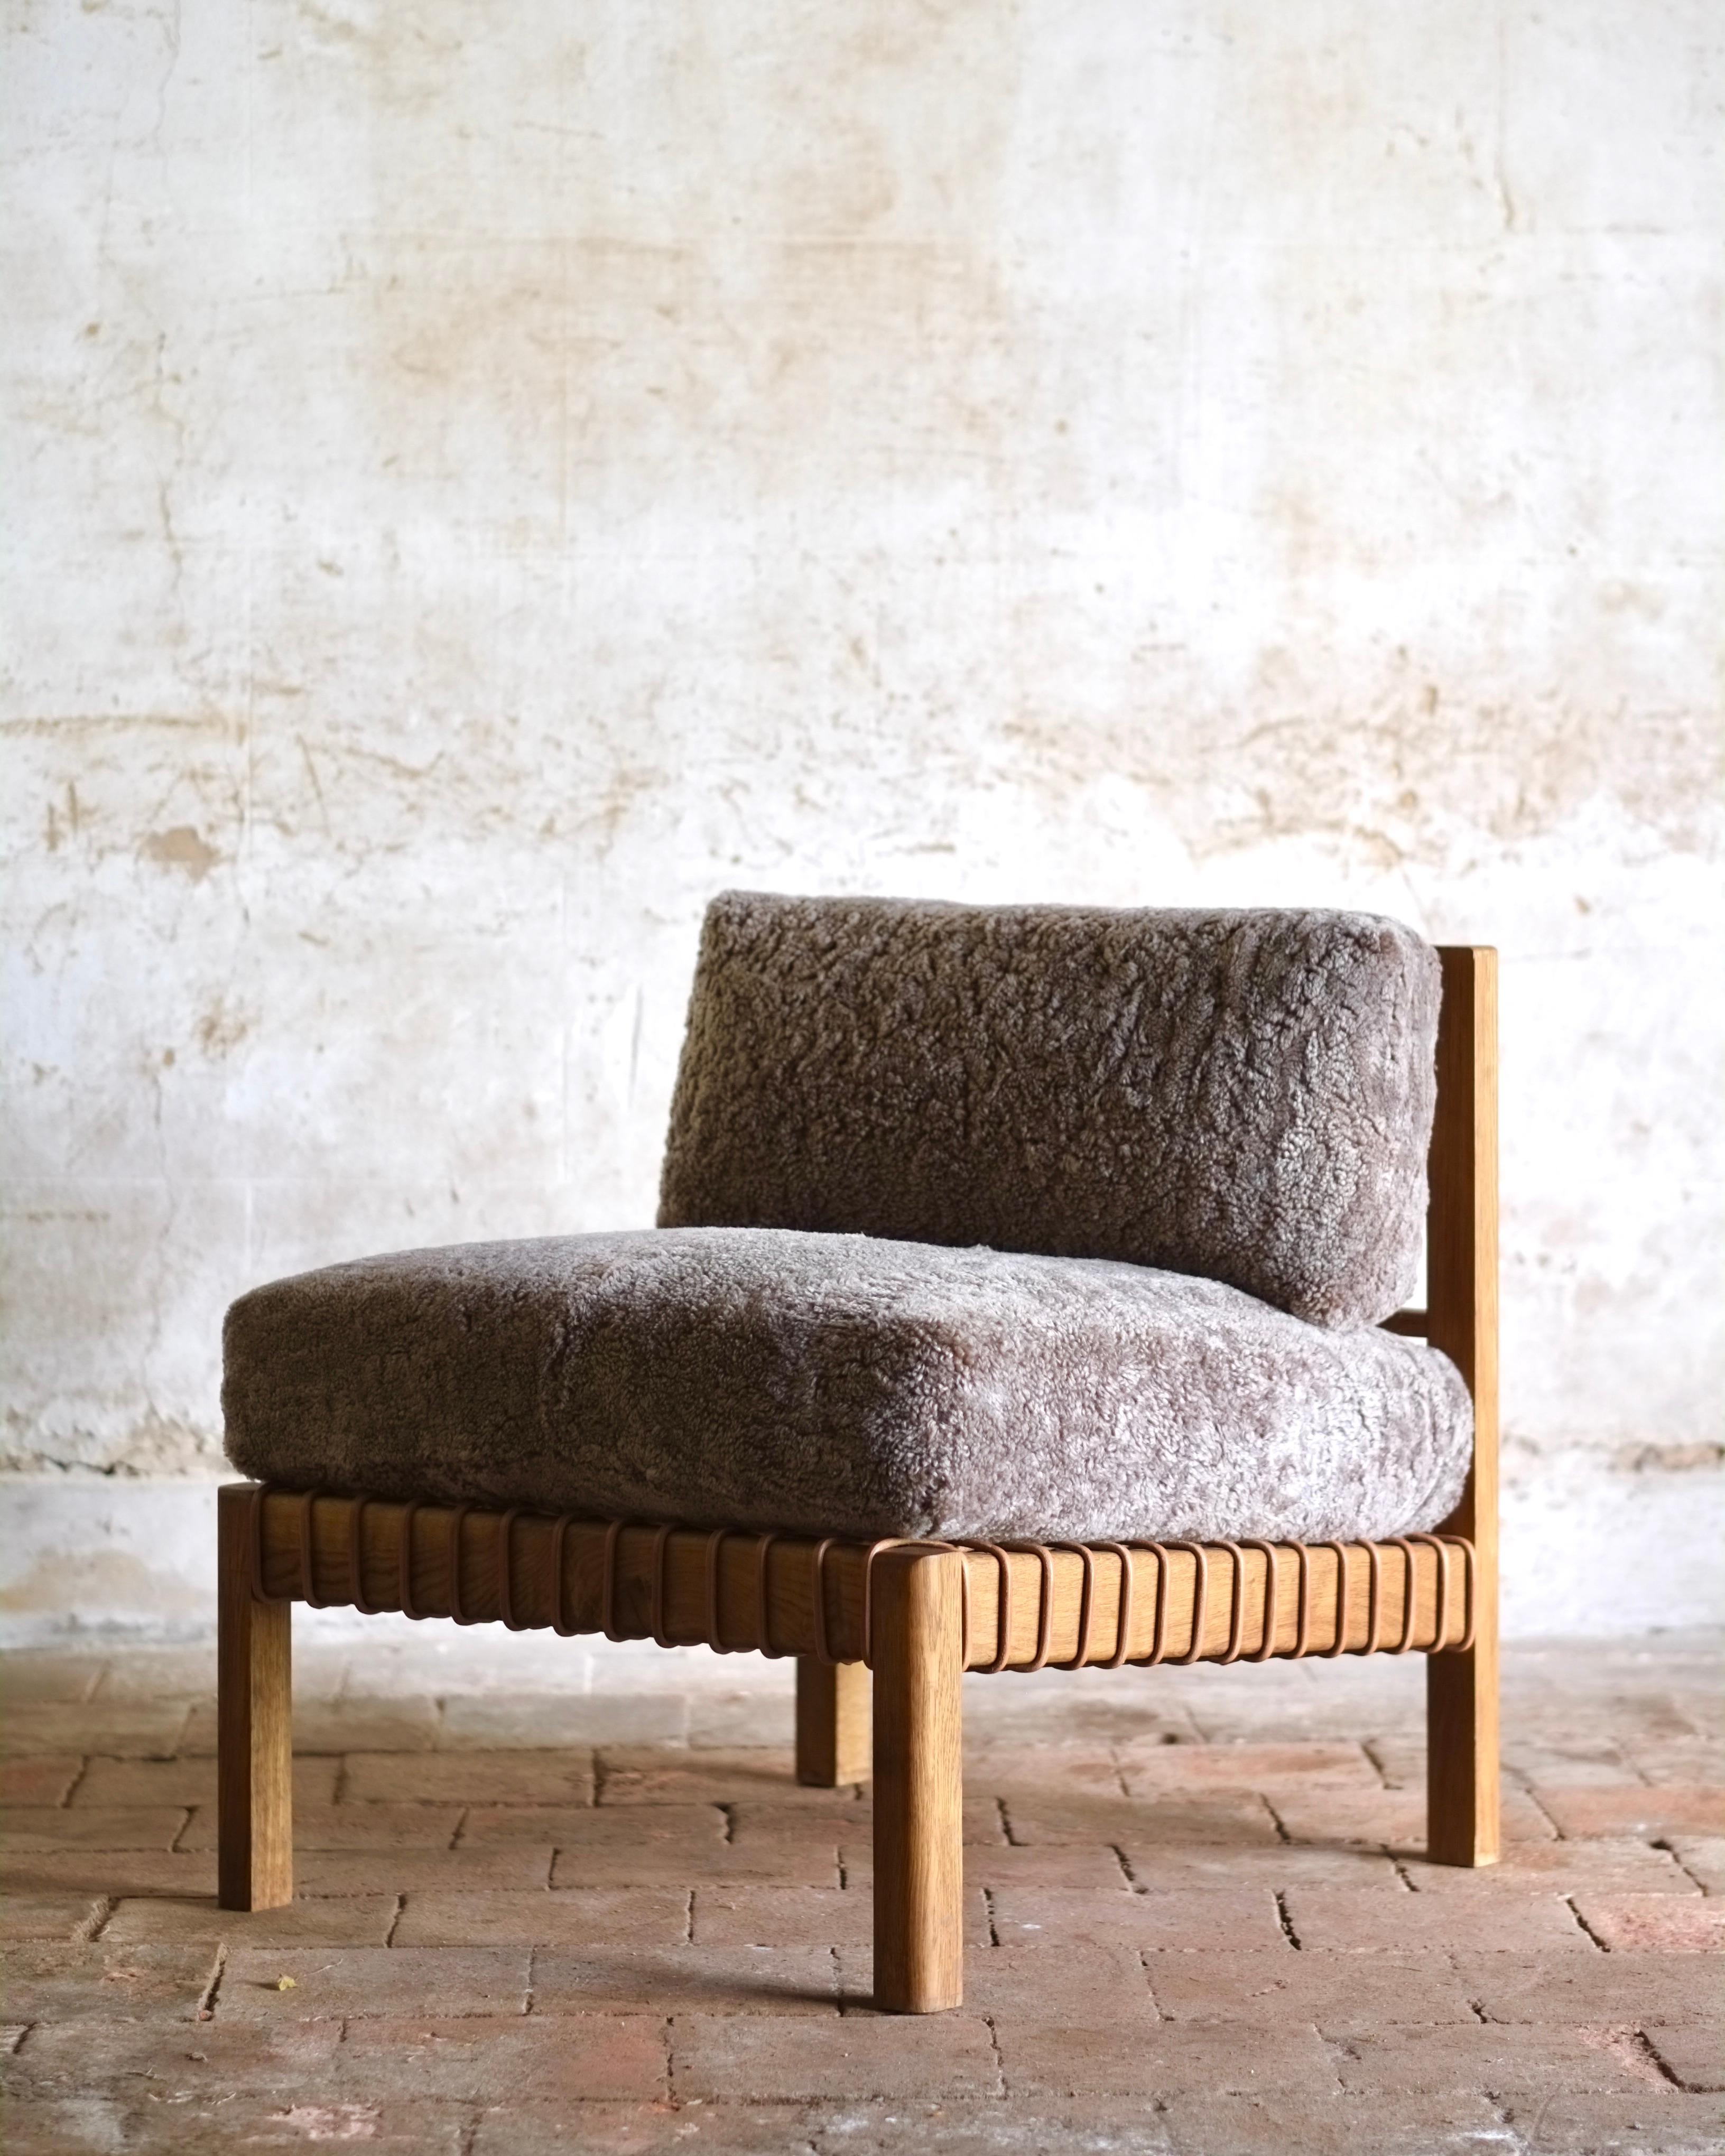 The Mochi uses three types of leatherwork to create a simple but beautifully detailed piece; woven leather cord webbing supports the supple upholstered cushions. Large shearling panels are wrapped whole around the interior to give a seamless